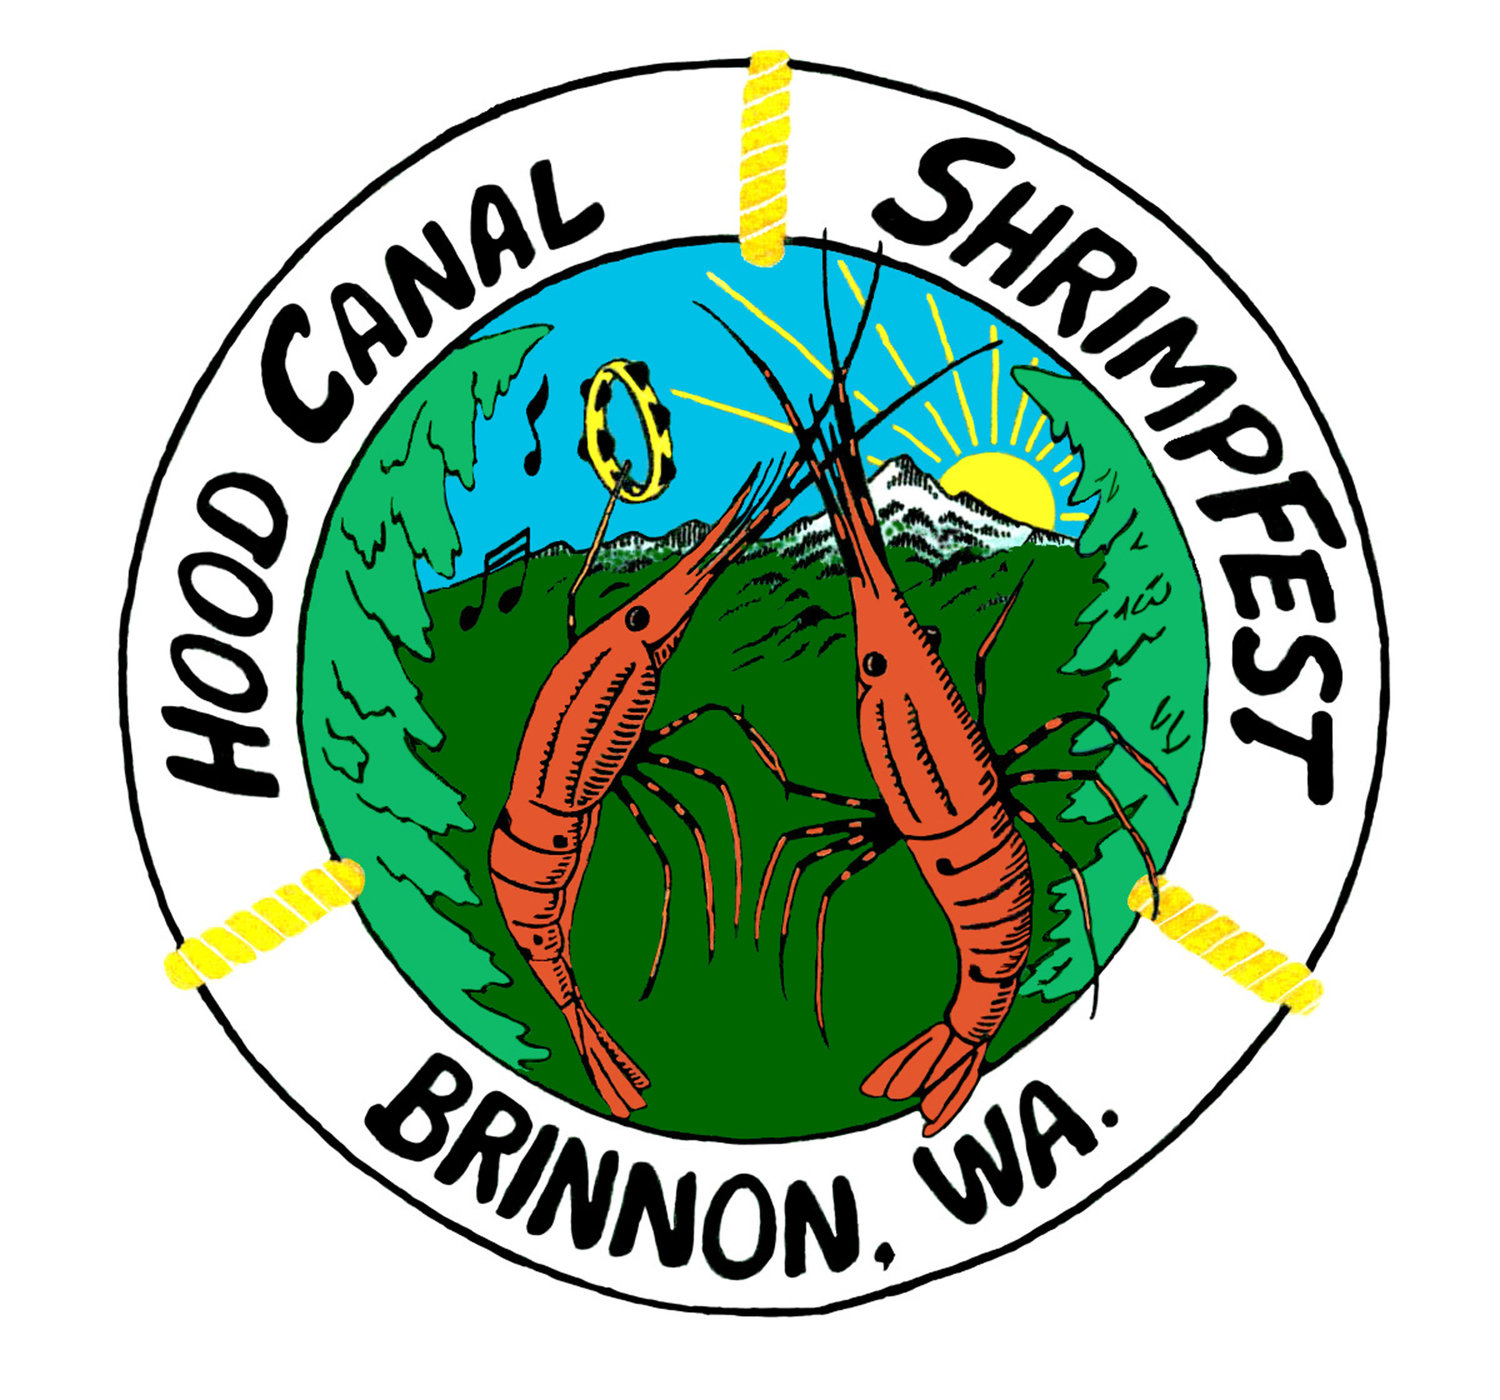 Emerald Towns Alliance recently announced the dates for ShrimpFest.